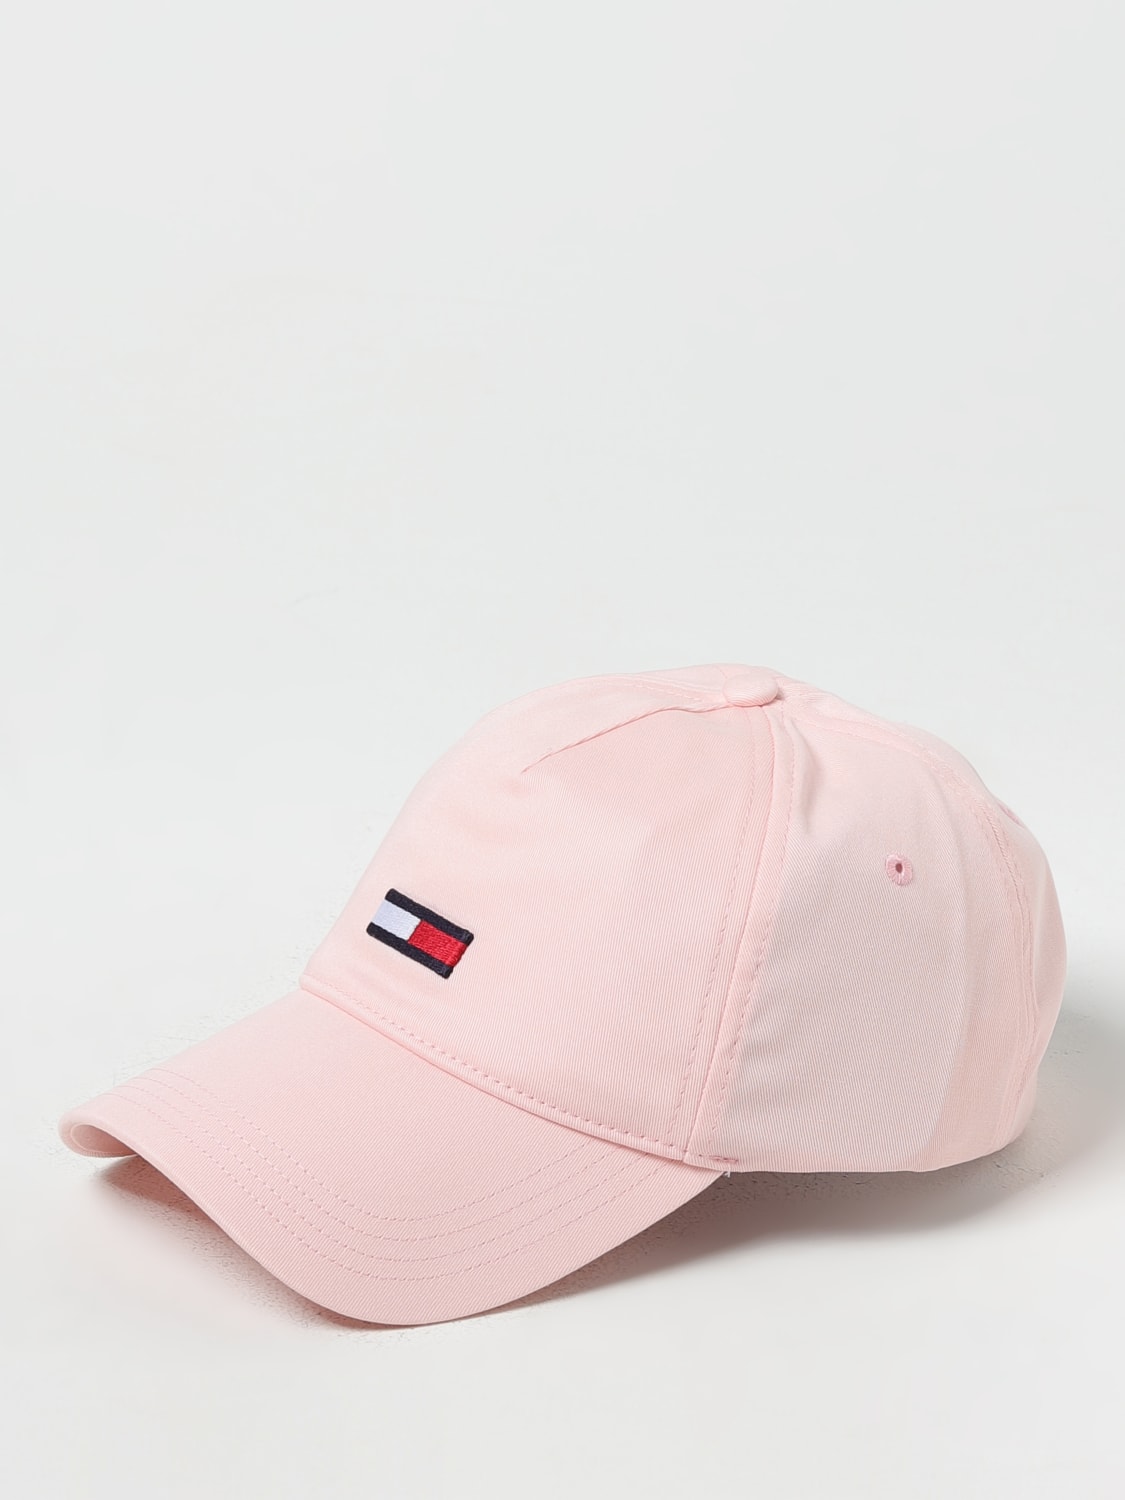 TOMMY HILFIGER: hat | Tommy - online for women AW0AW14986 Hilfiger hat at Pink